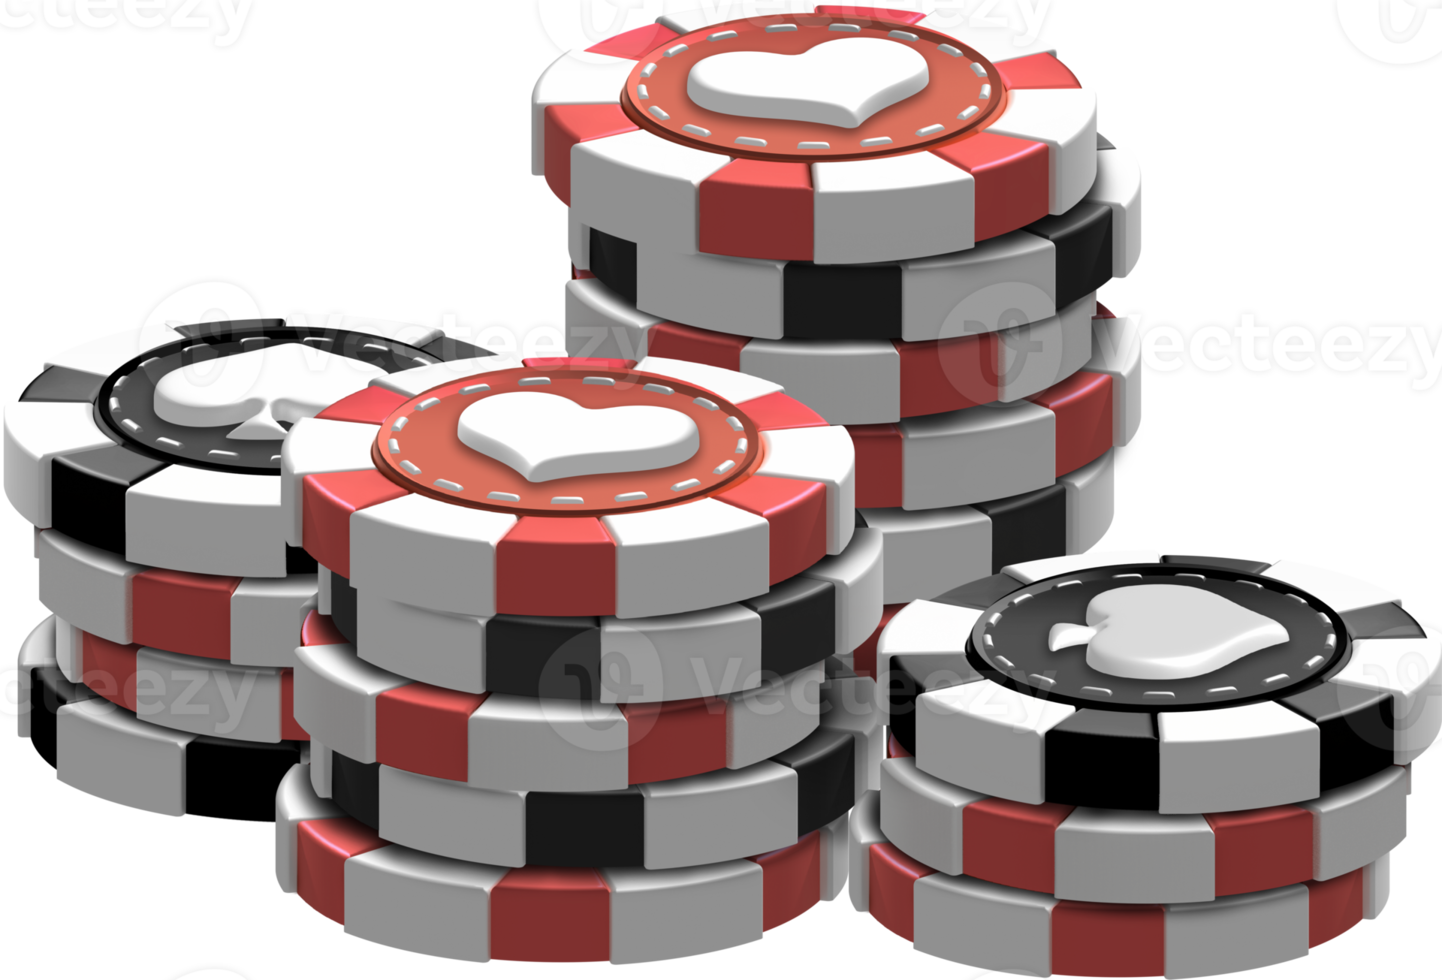 Casino-Poker-Chip png